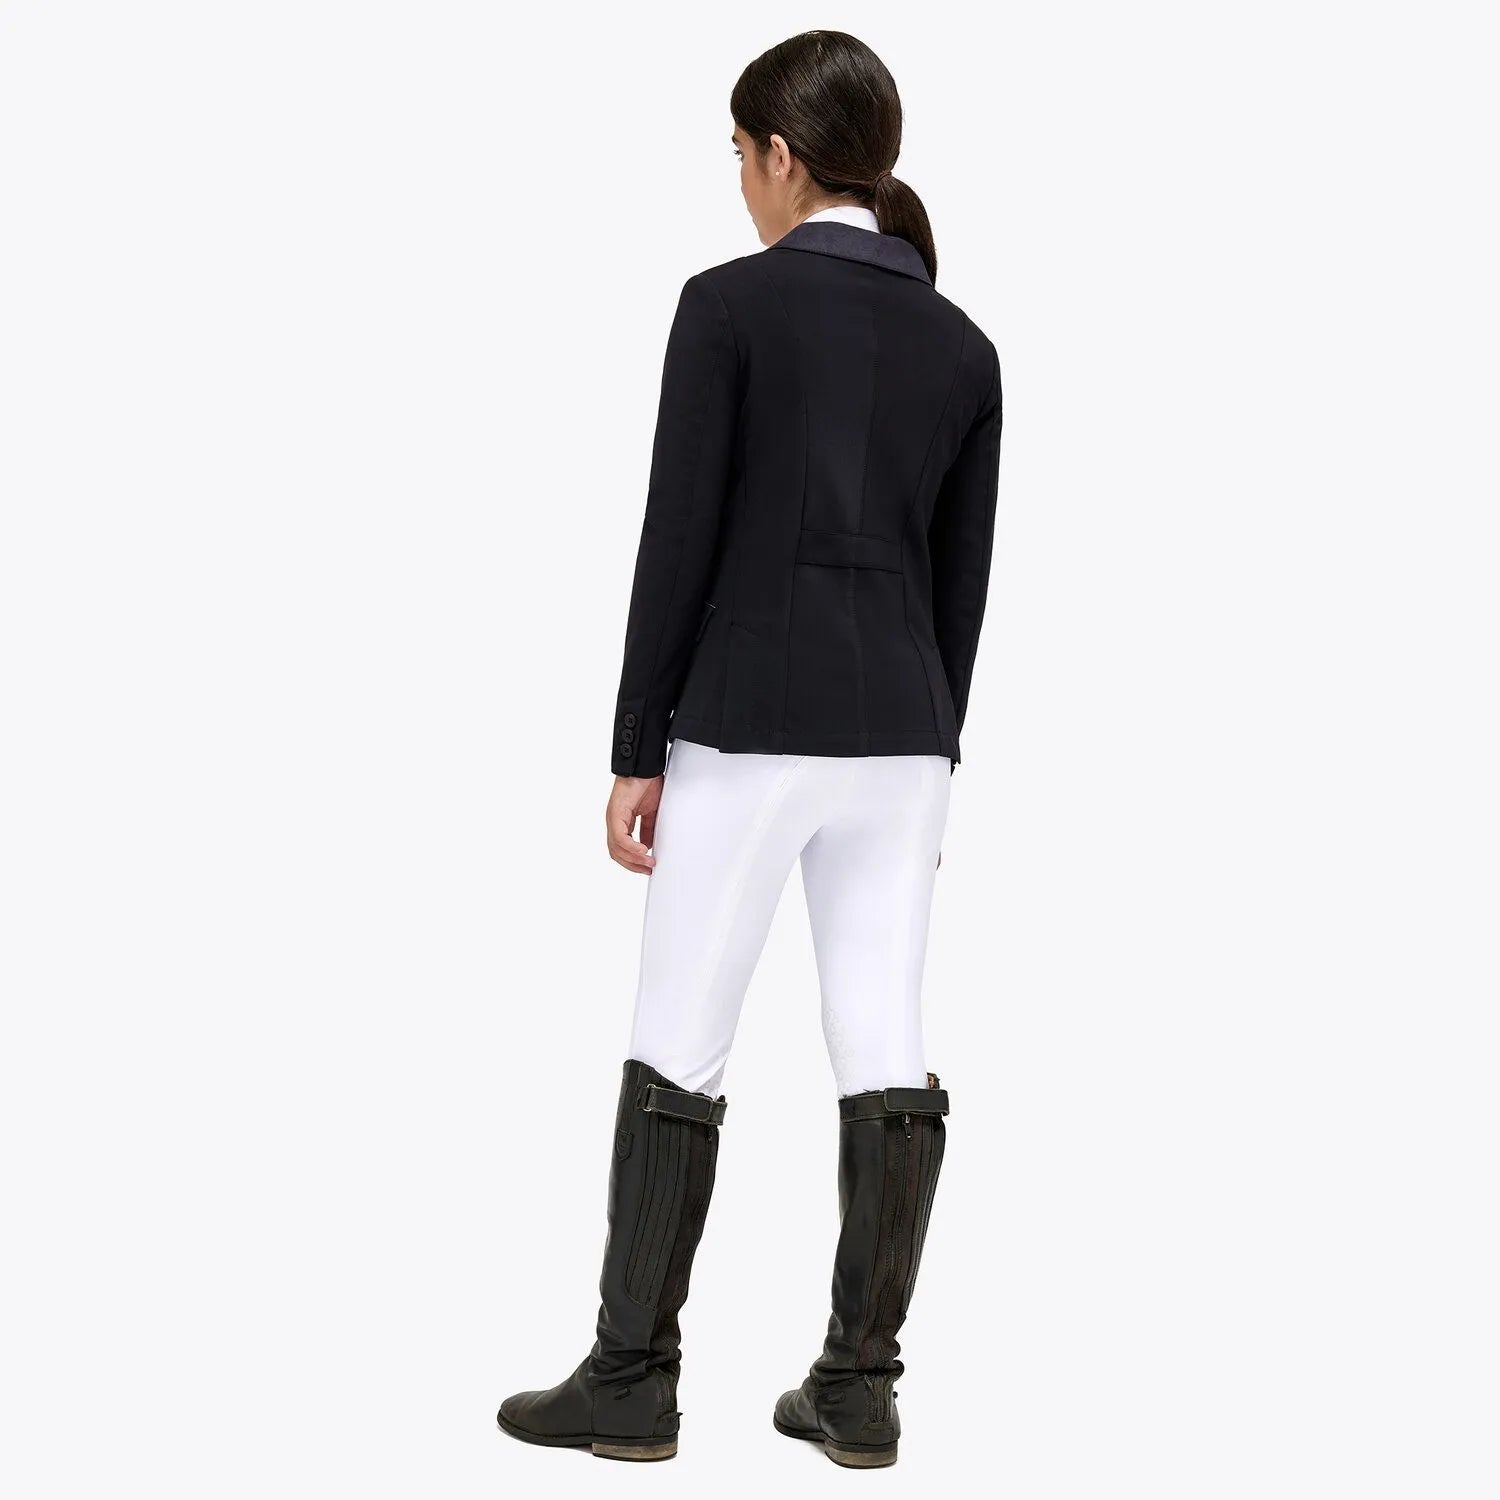 Girls Young Rider Show Jacket - Black